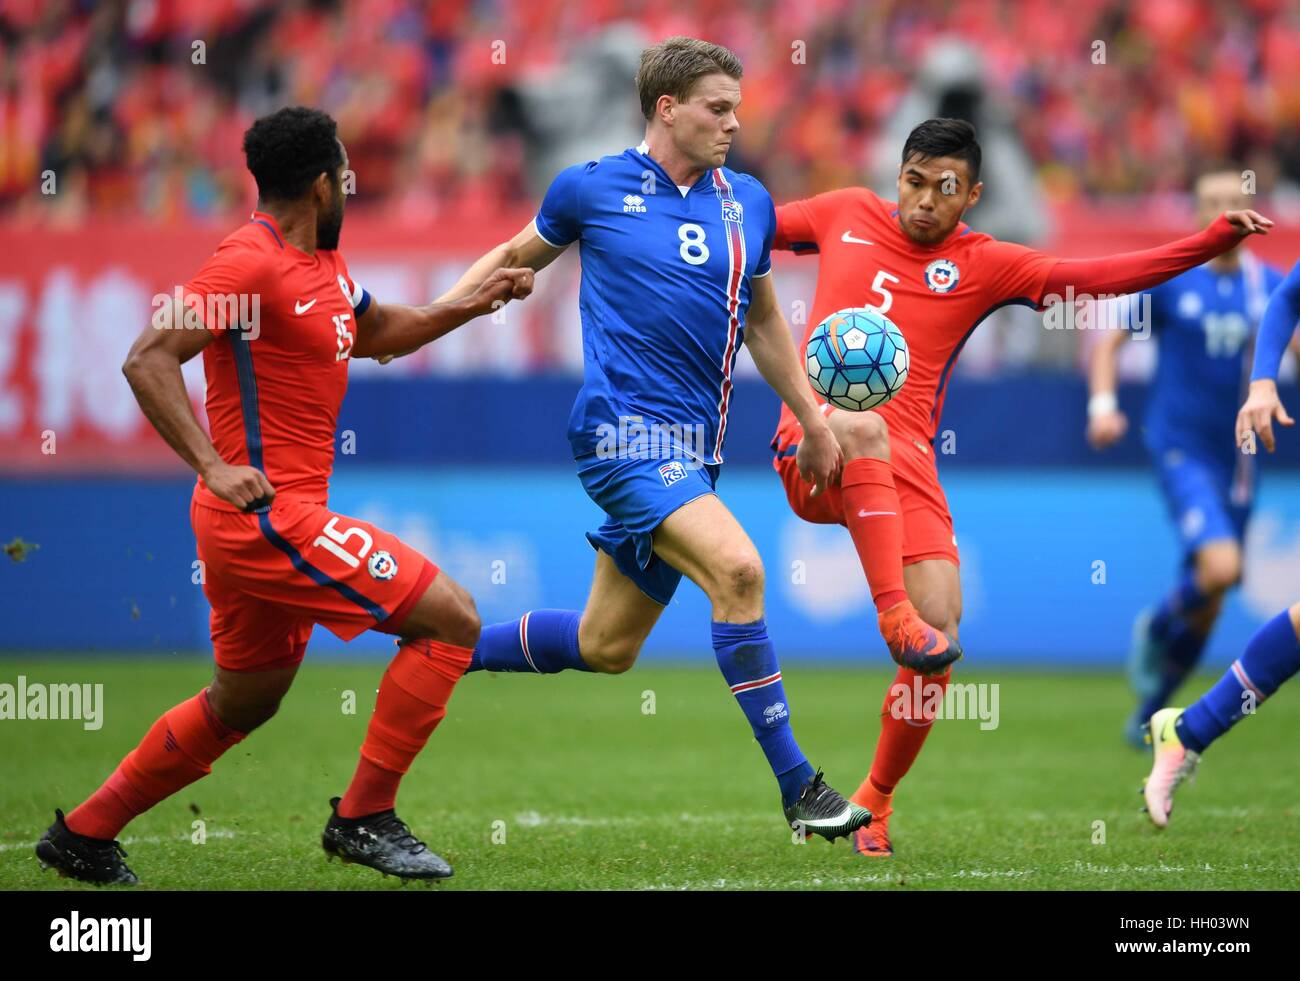 Nanning, China's Guangxi Zhuang Autonomous Region. 15th Jan, 2017. Bjorn Bergmann Siguroarson (C) of Iceland vies with Paulo Diaz (R) and Jean Beausejour (L) of Chile during the final match at 2017 China Cup International Football Championship in Nanning, capital of south China's Guangxi Zhuang Autonomous Region, Jan. 15, 2017. Chile beat Iceland 1-0. Credit: Guo Yong/Xinhua/Alamy Live News Stock Photo